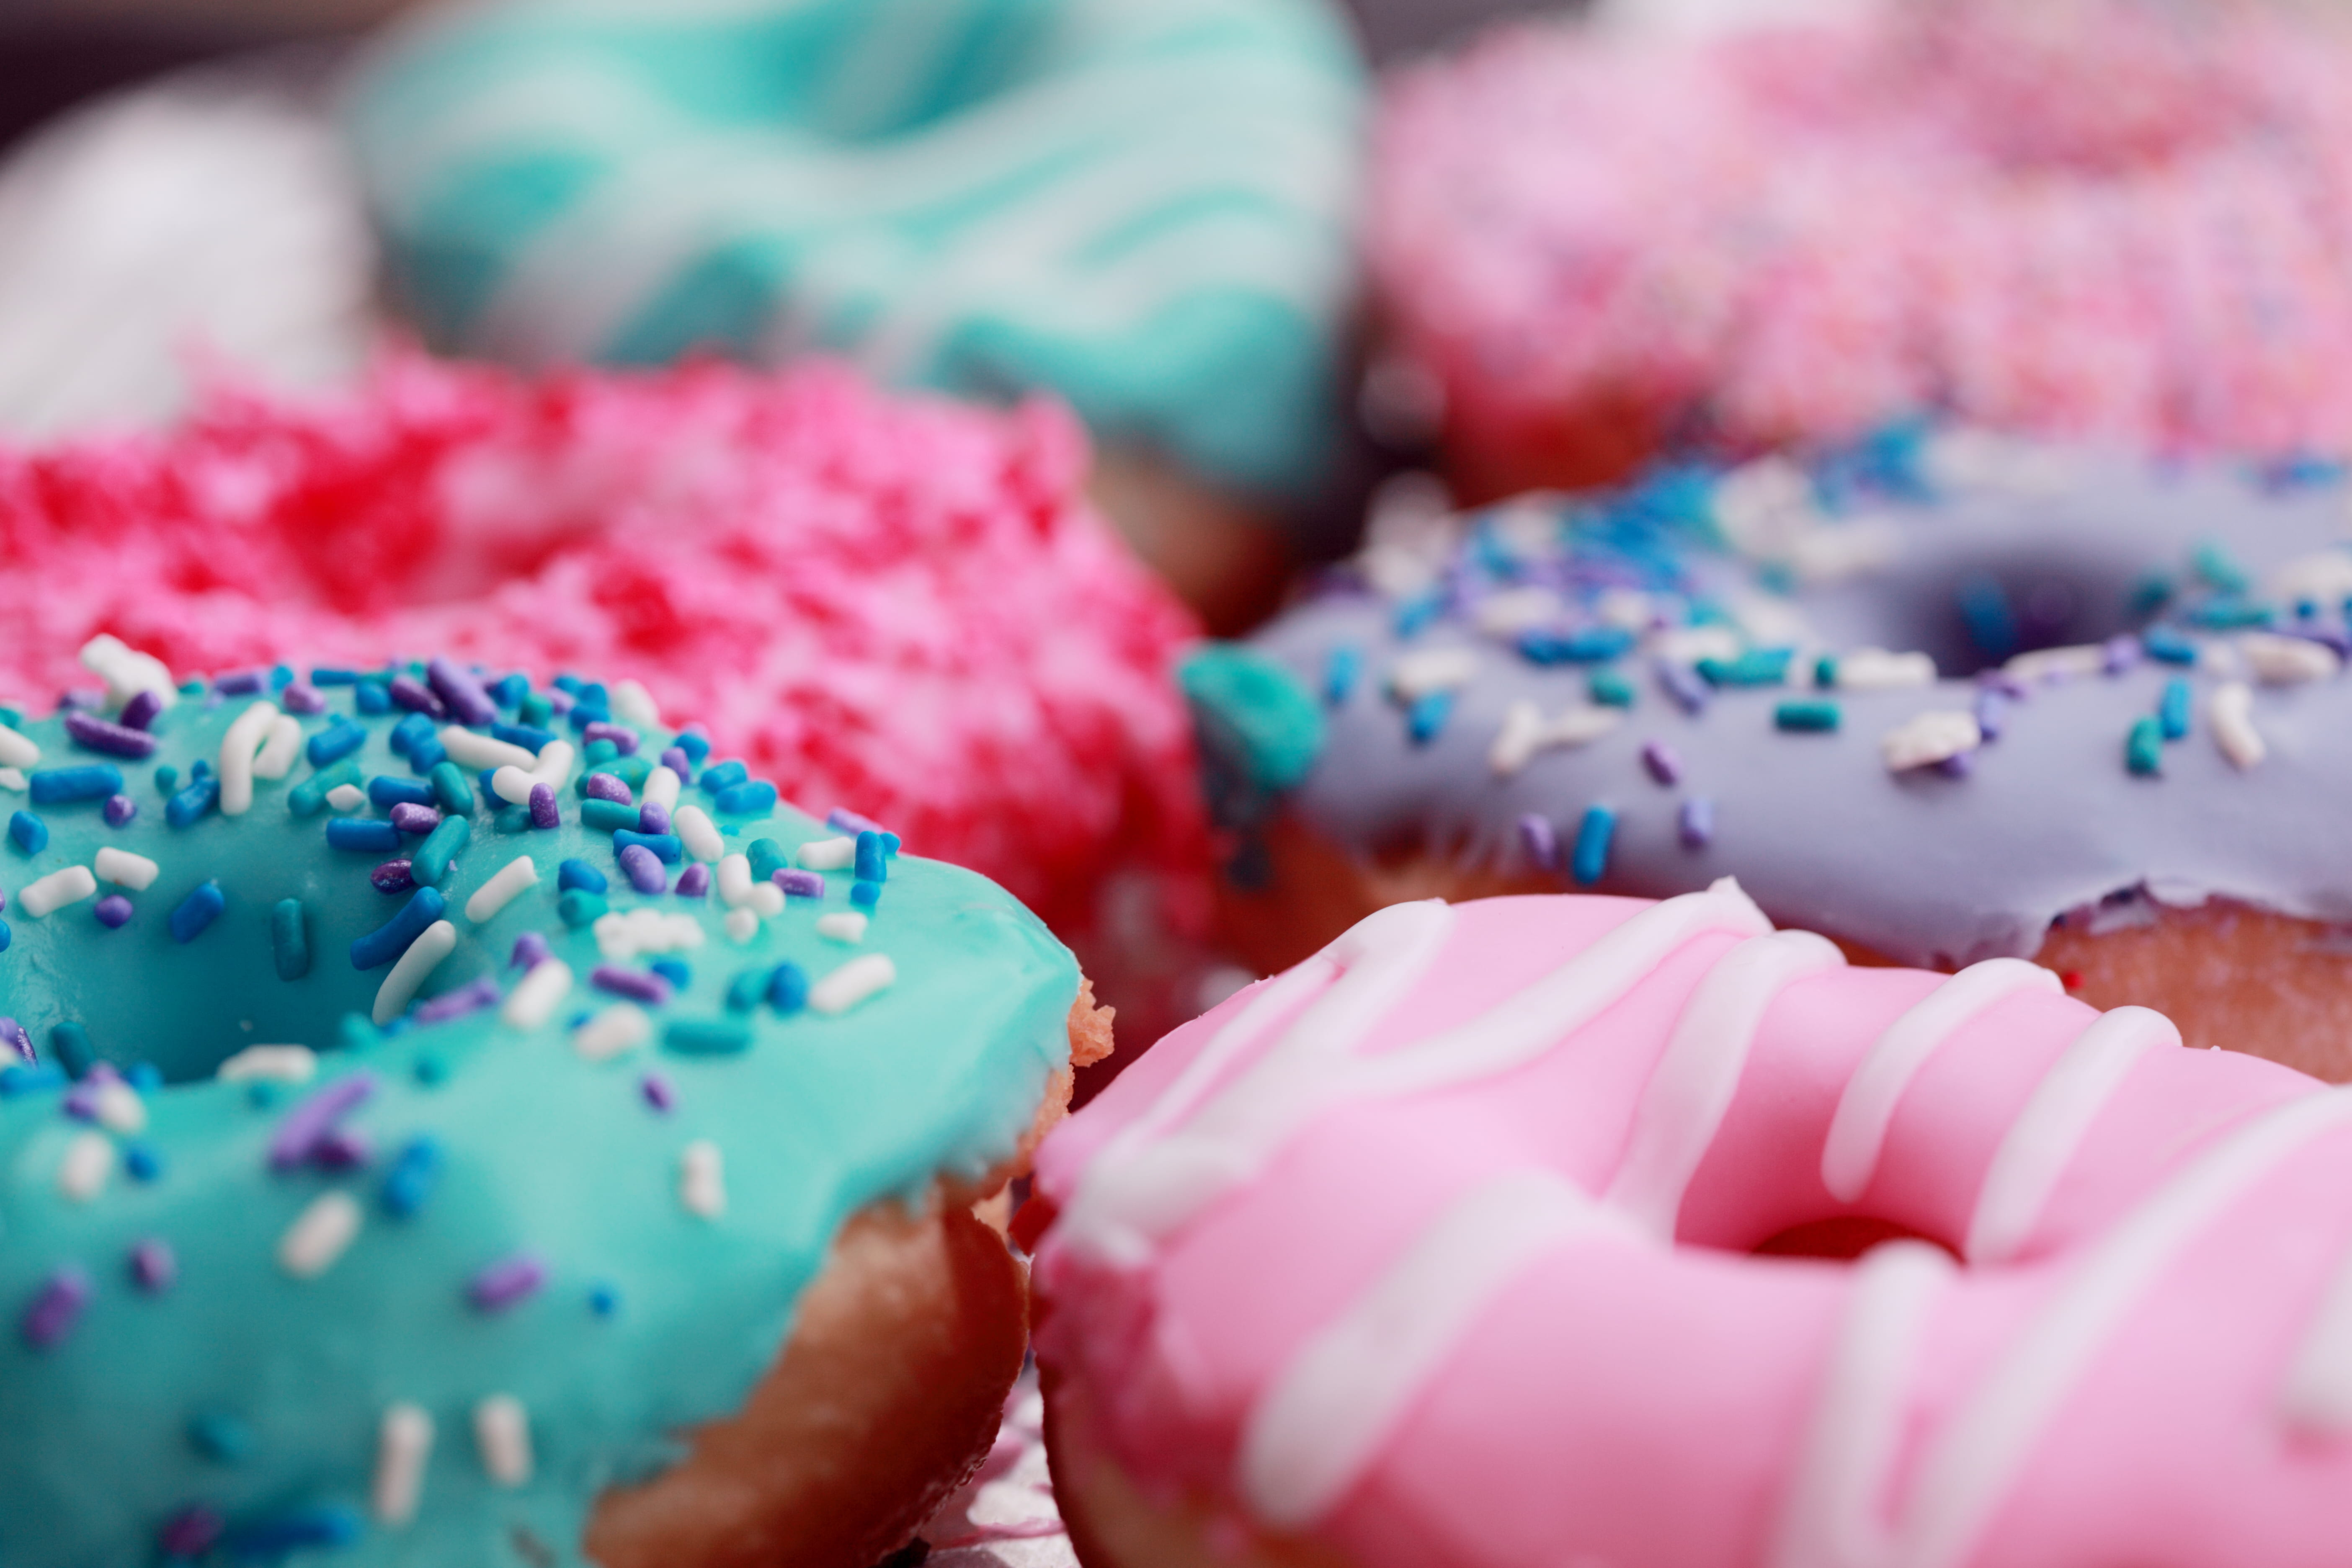 shallow focus photography of assorted doughnuts with sprinkles, variety of doughnuts